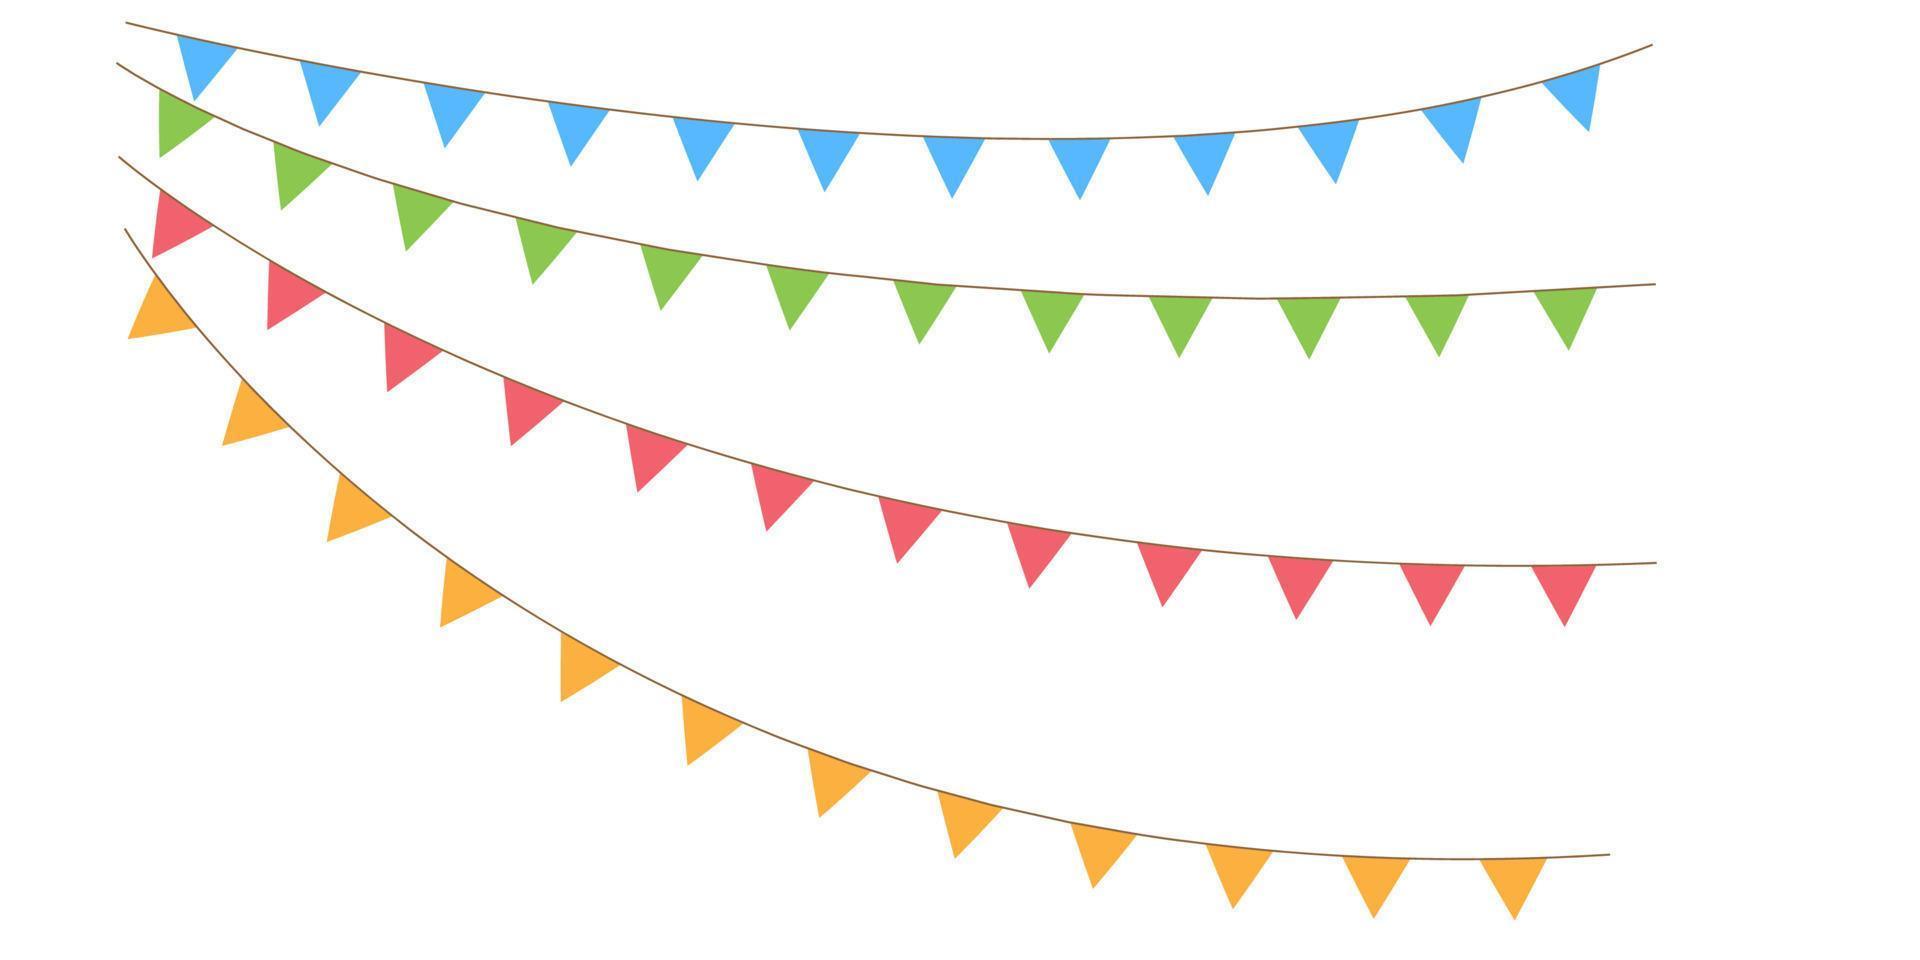 Multicolored bright buntings flags garlands isolated on white background. Bunting and party flag vector illustration